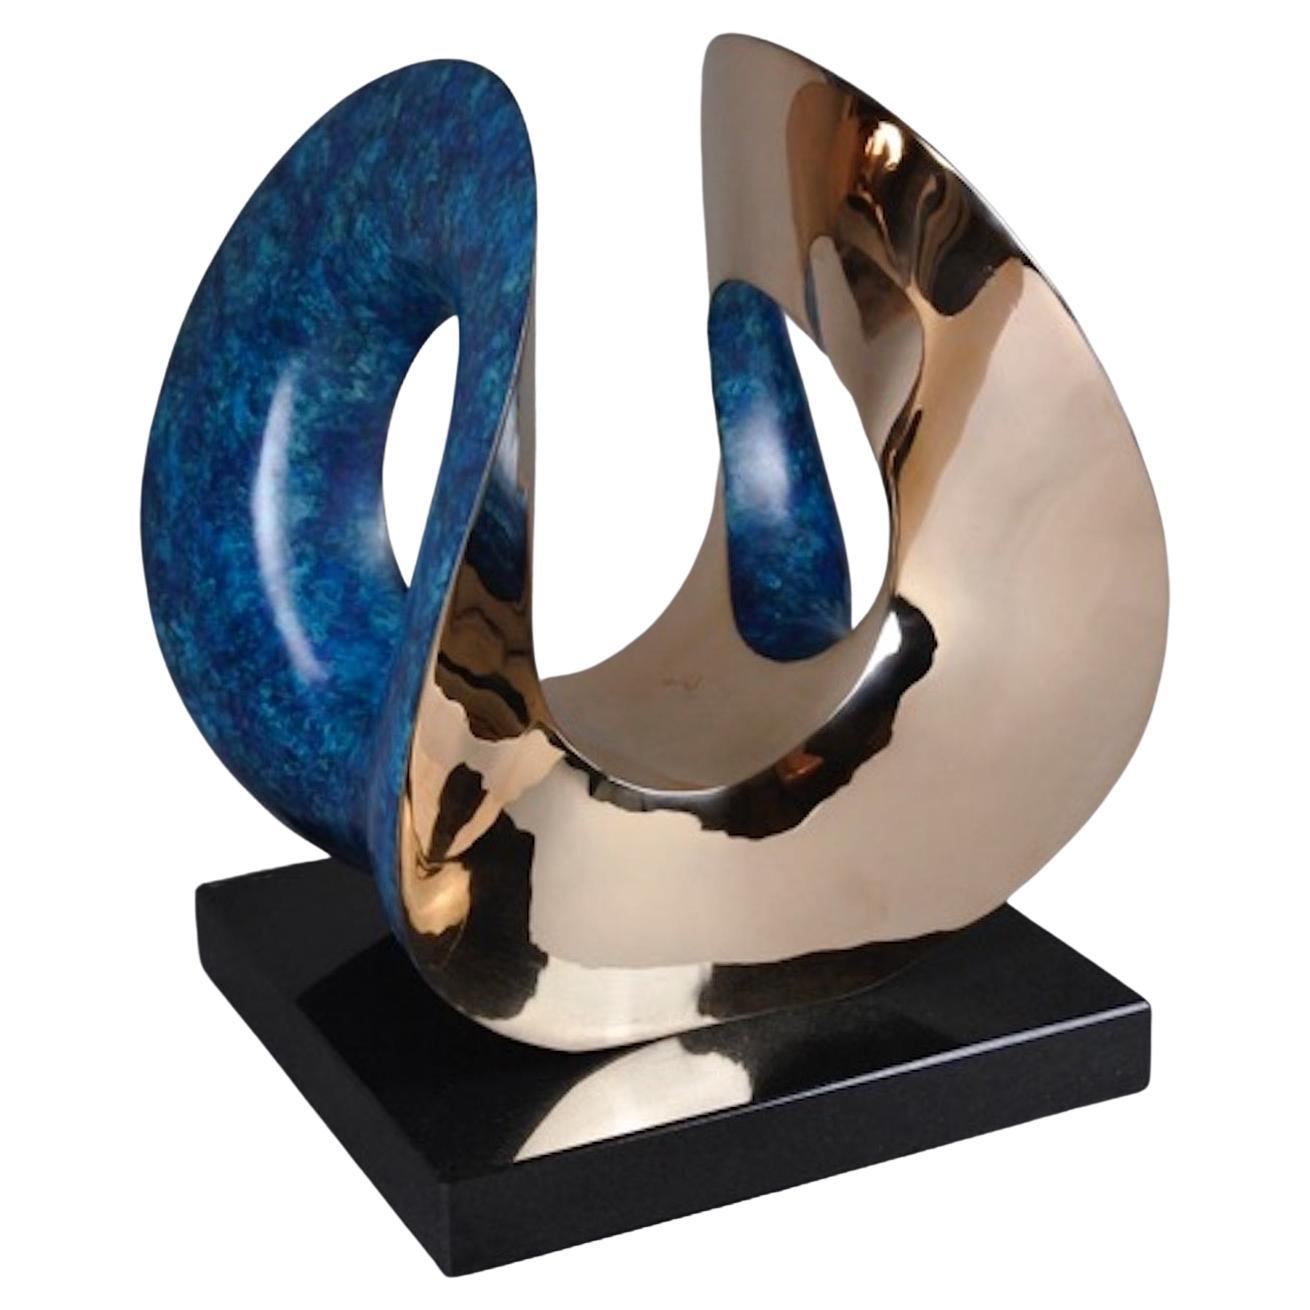 Bronze tabletop sculpture that pays tribute to Naum Gabo and the Constructivists For Sale